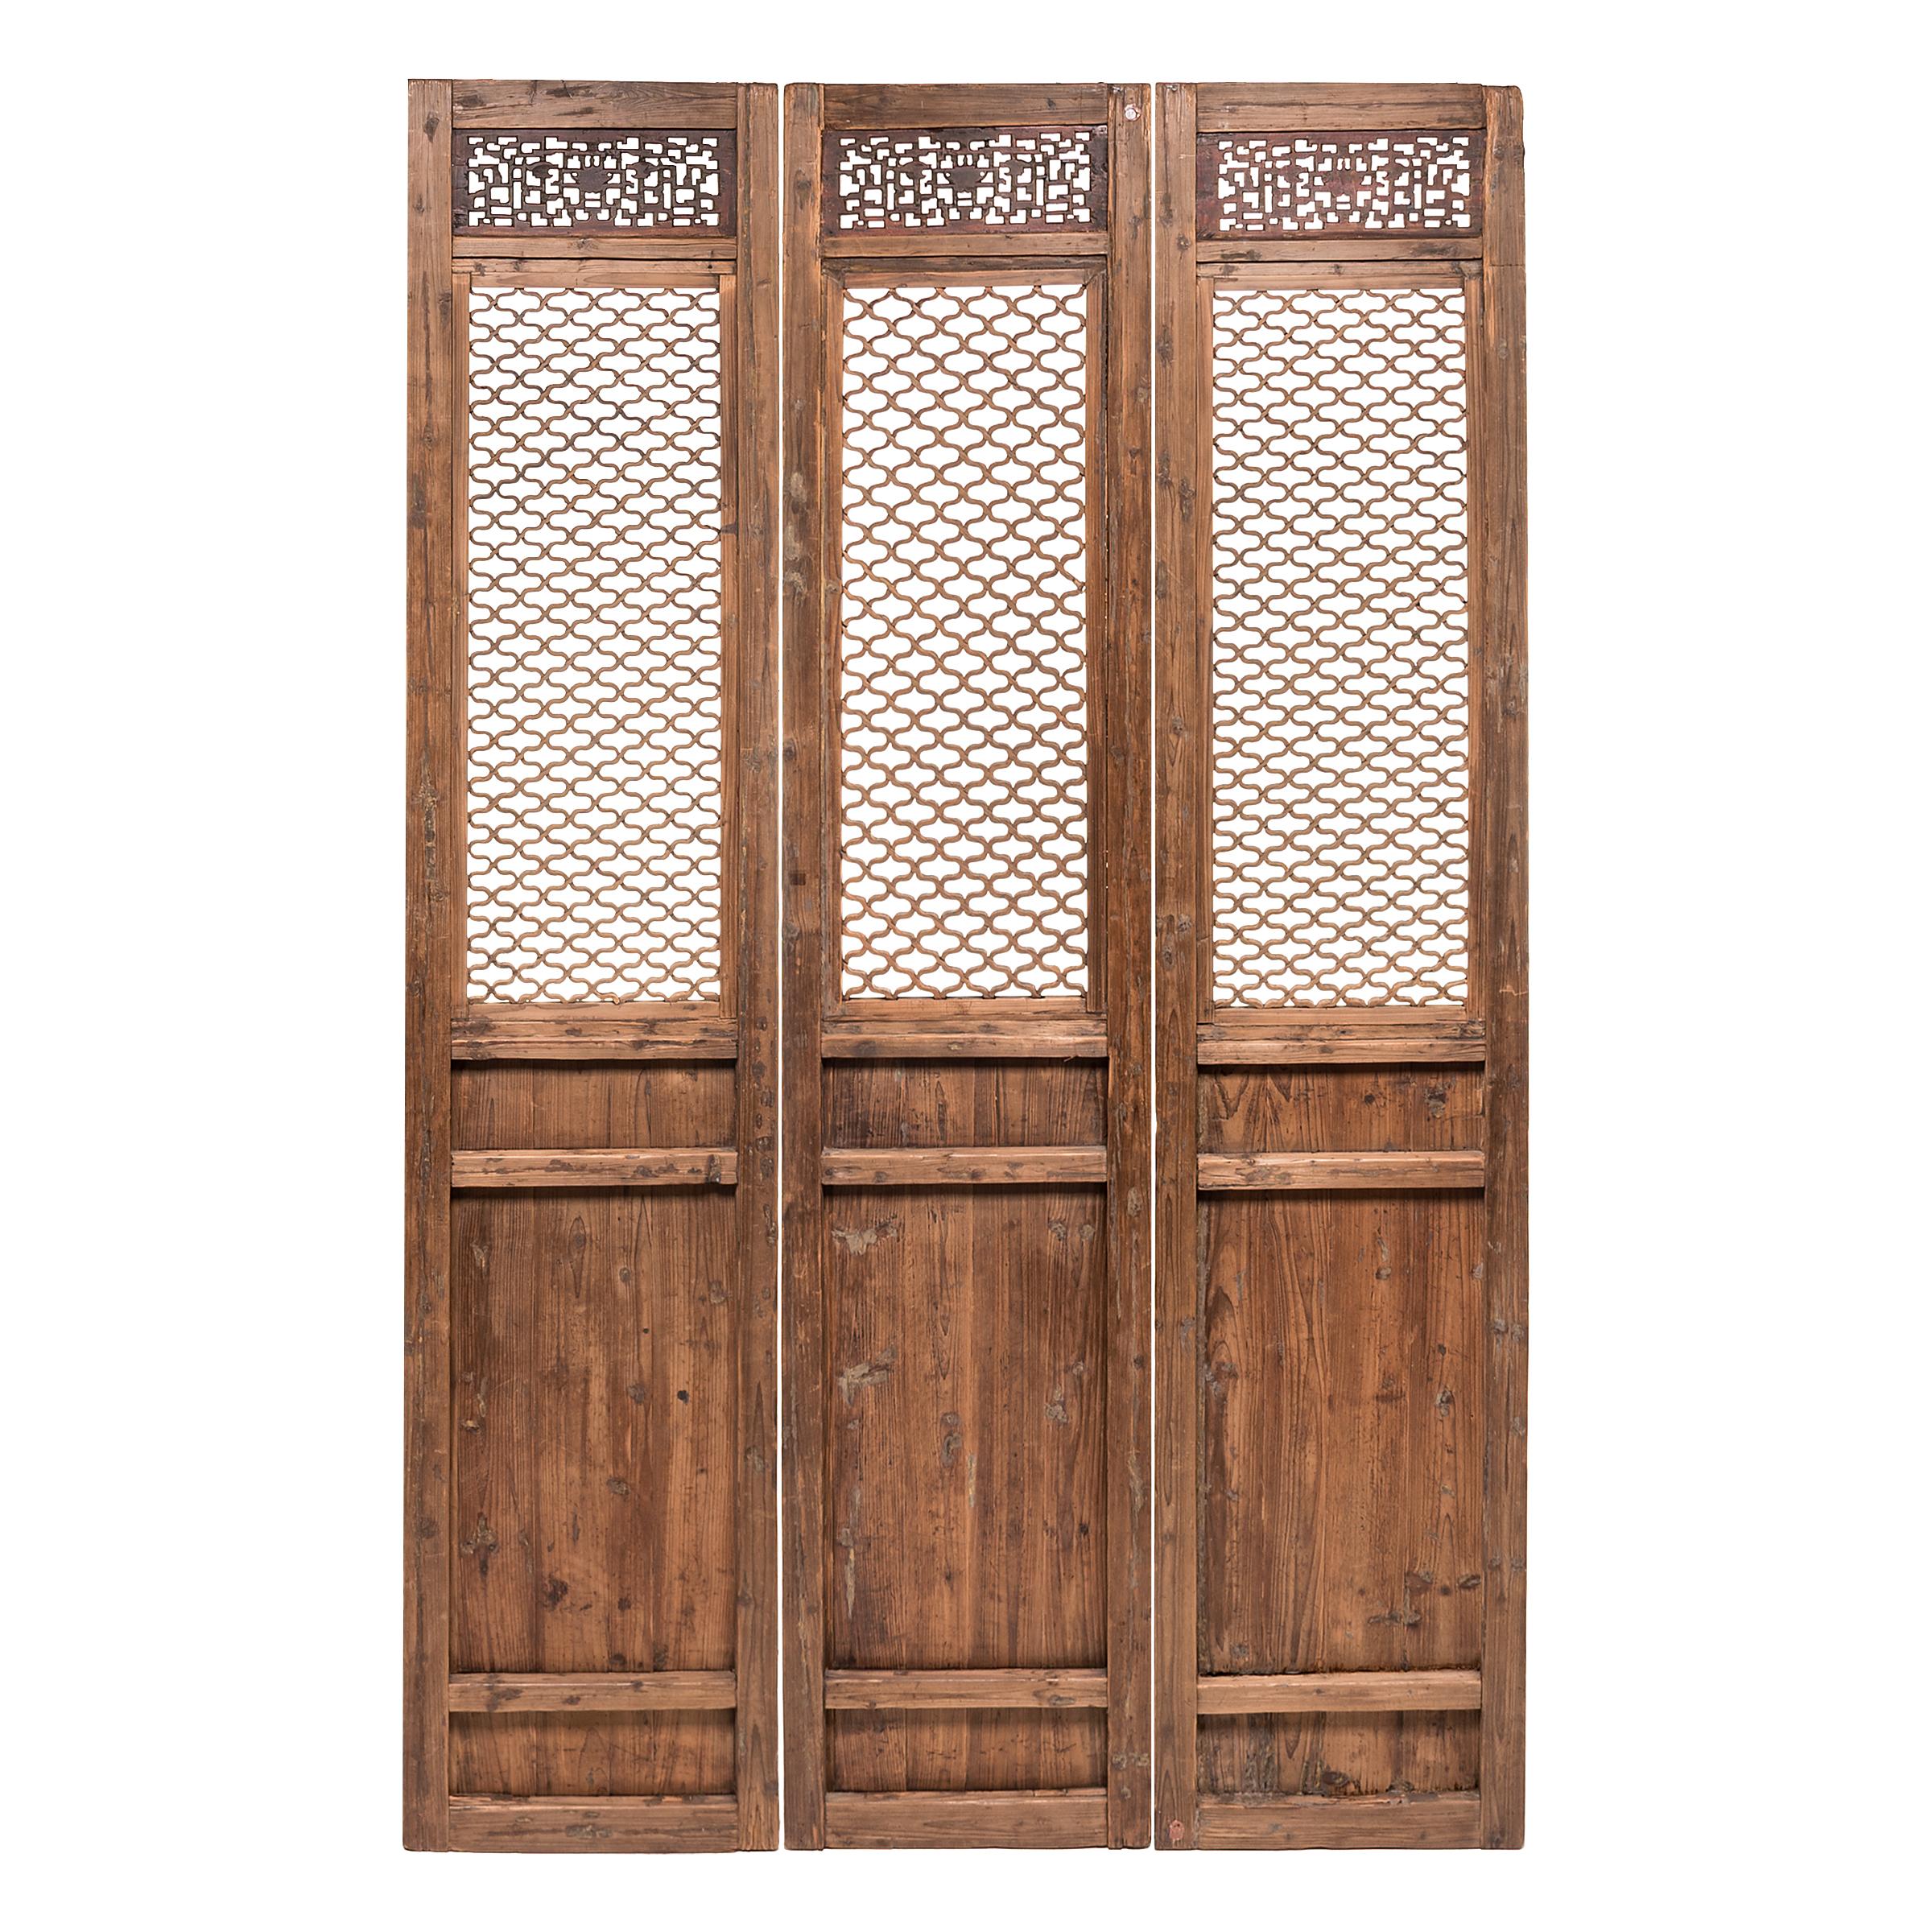 Hand-Carved Set of Three Chinese Quadrilobe Lattice Courtyard Panels, c. 1850 For Sale